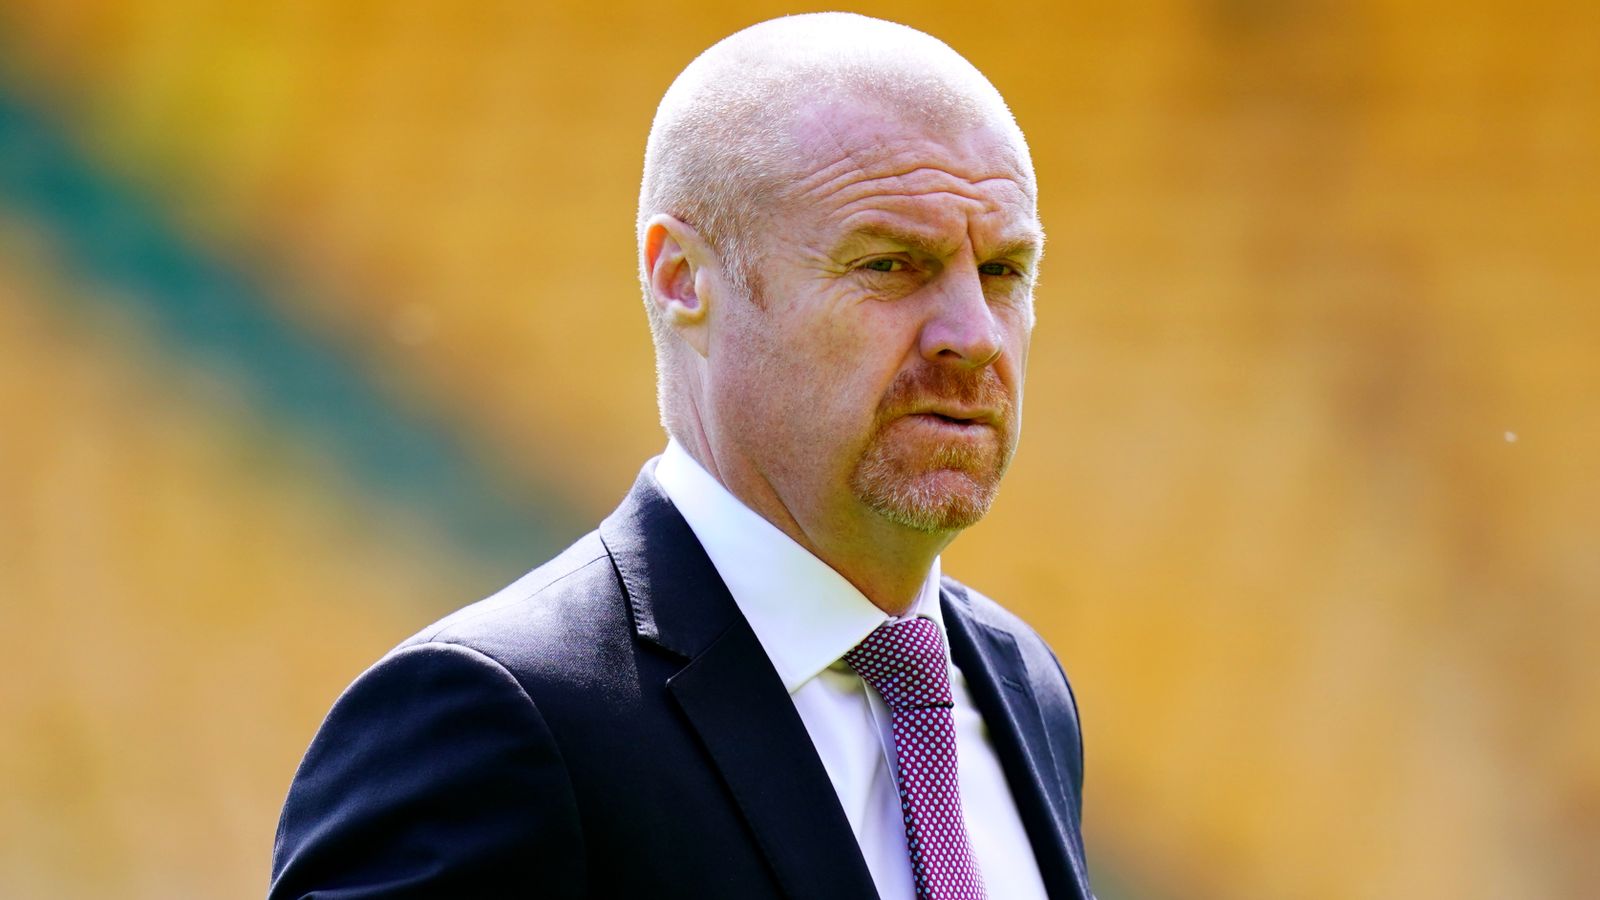 Sean Dyche sacked as Burnley boss after 10 years at the club